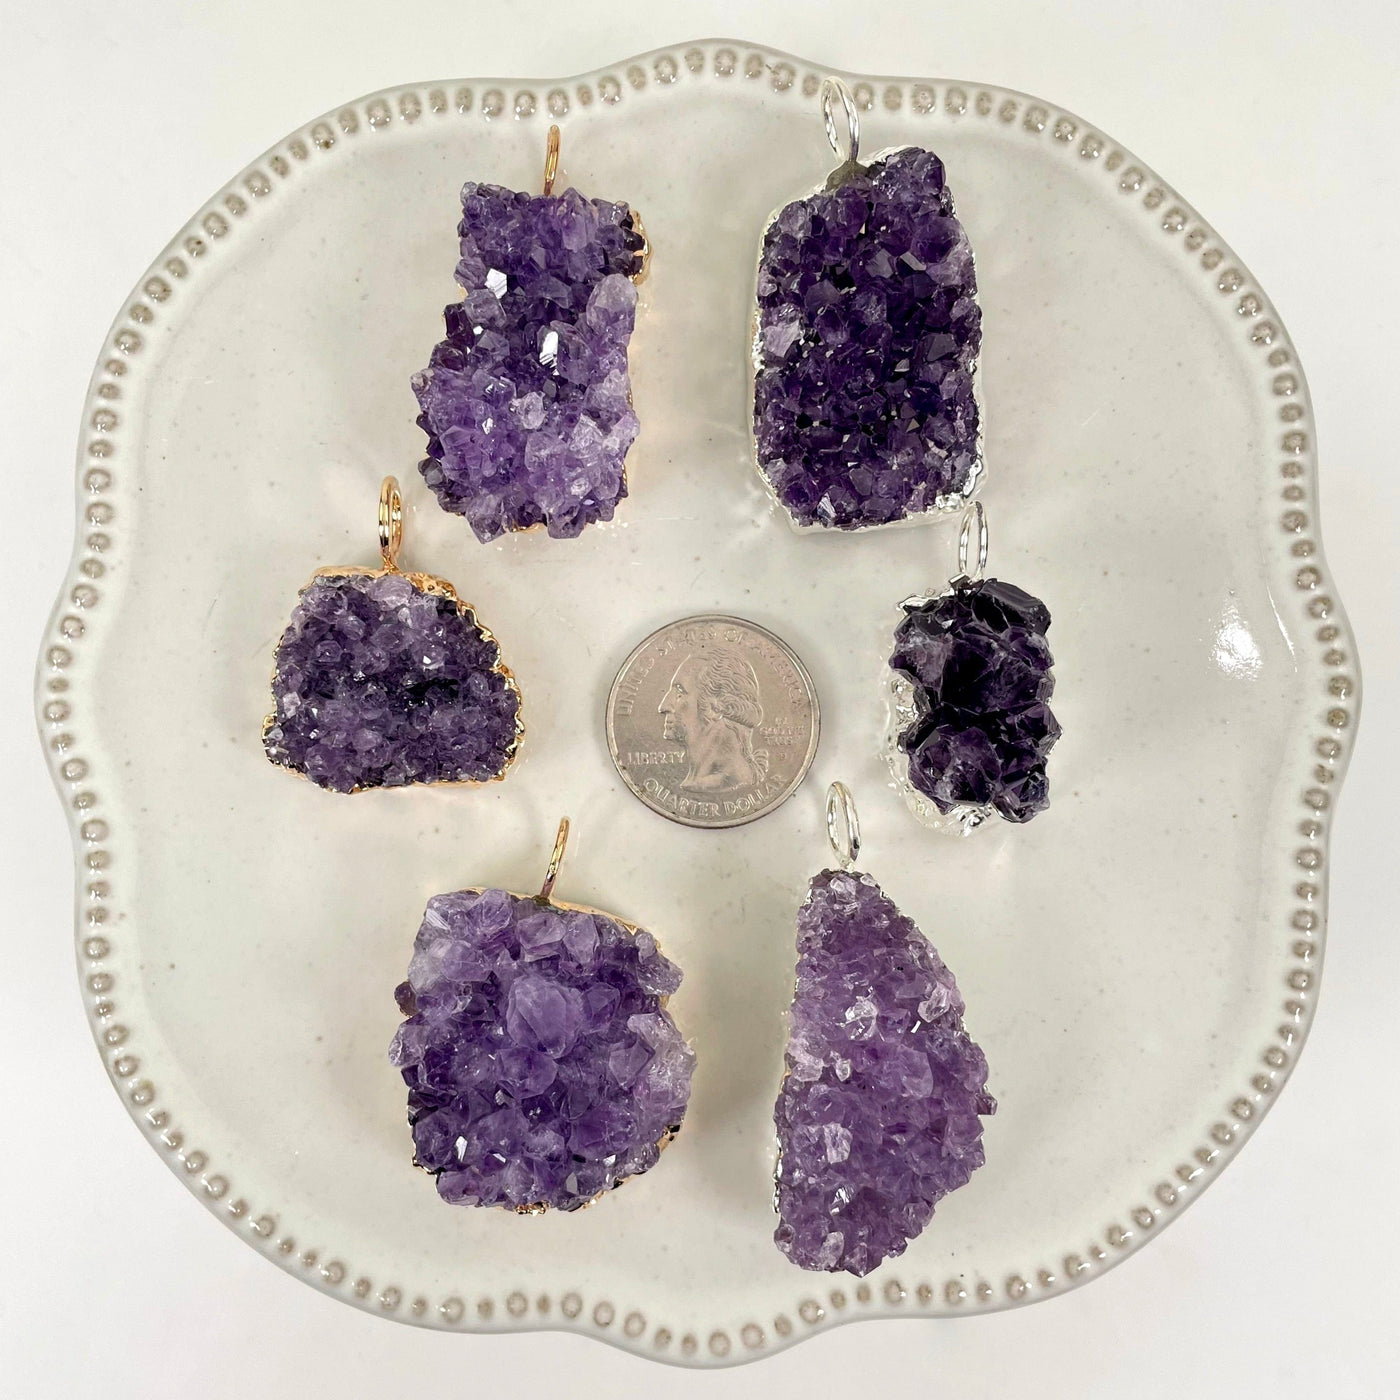 overhead view of three gold and three silver freeform amethyst druzy cluster pendants on display on white background with a quarter for size reference